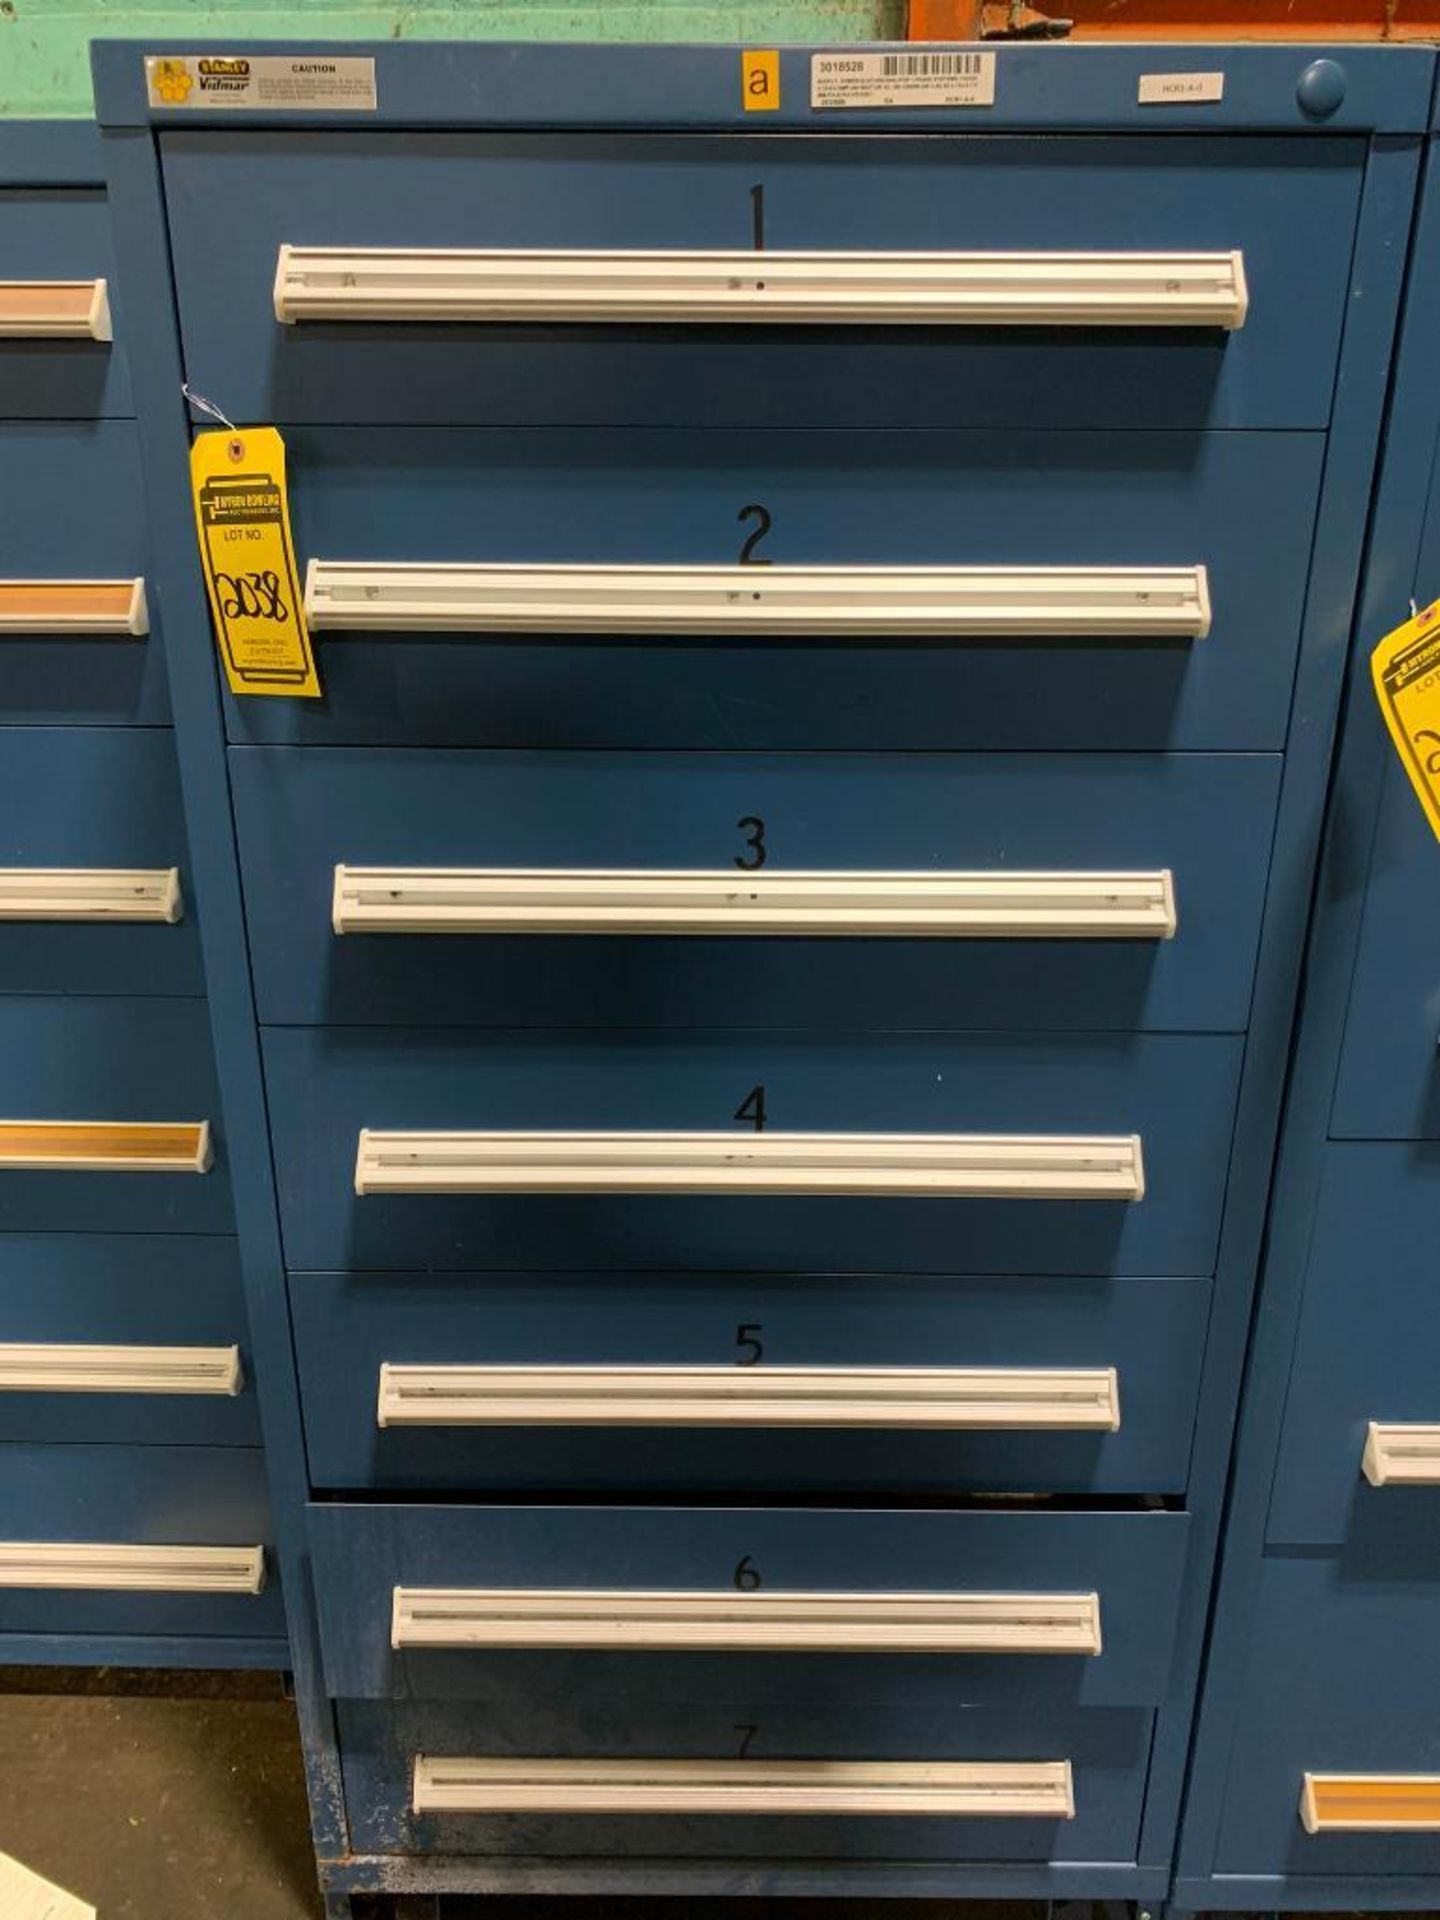 Stanley Vidmar 7-Drawer Cabinet w/ Electrical Support Equipment; Circuit Cards, Assorted Modules, Ci